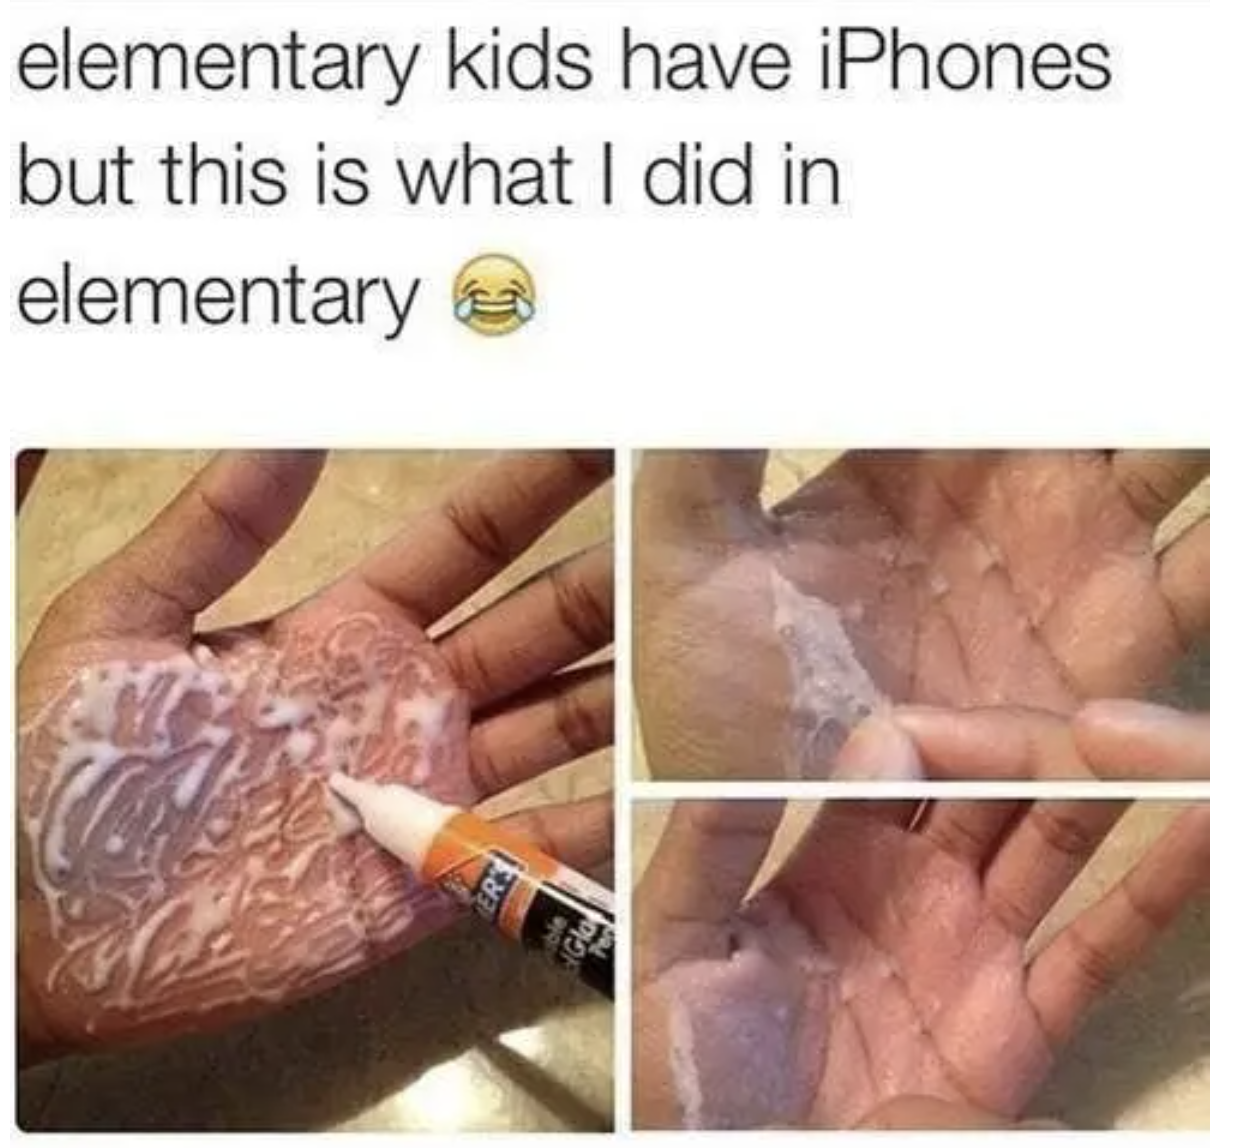 Kid rubbing glue over his hand and peeling it off